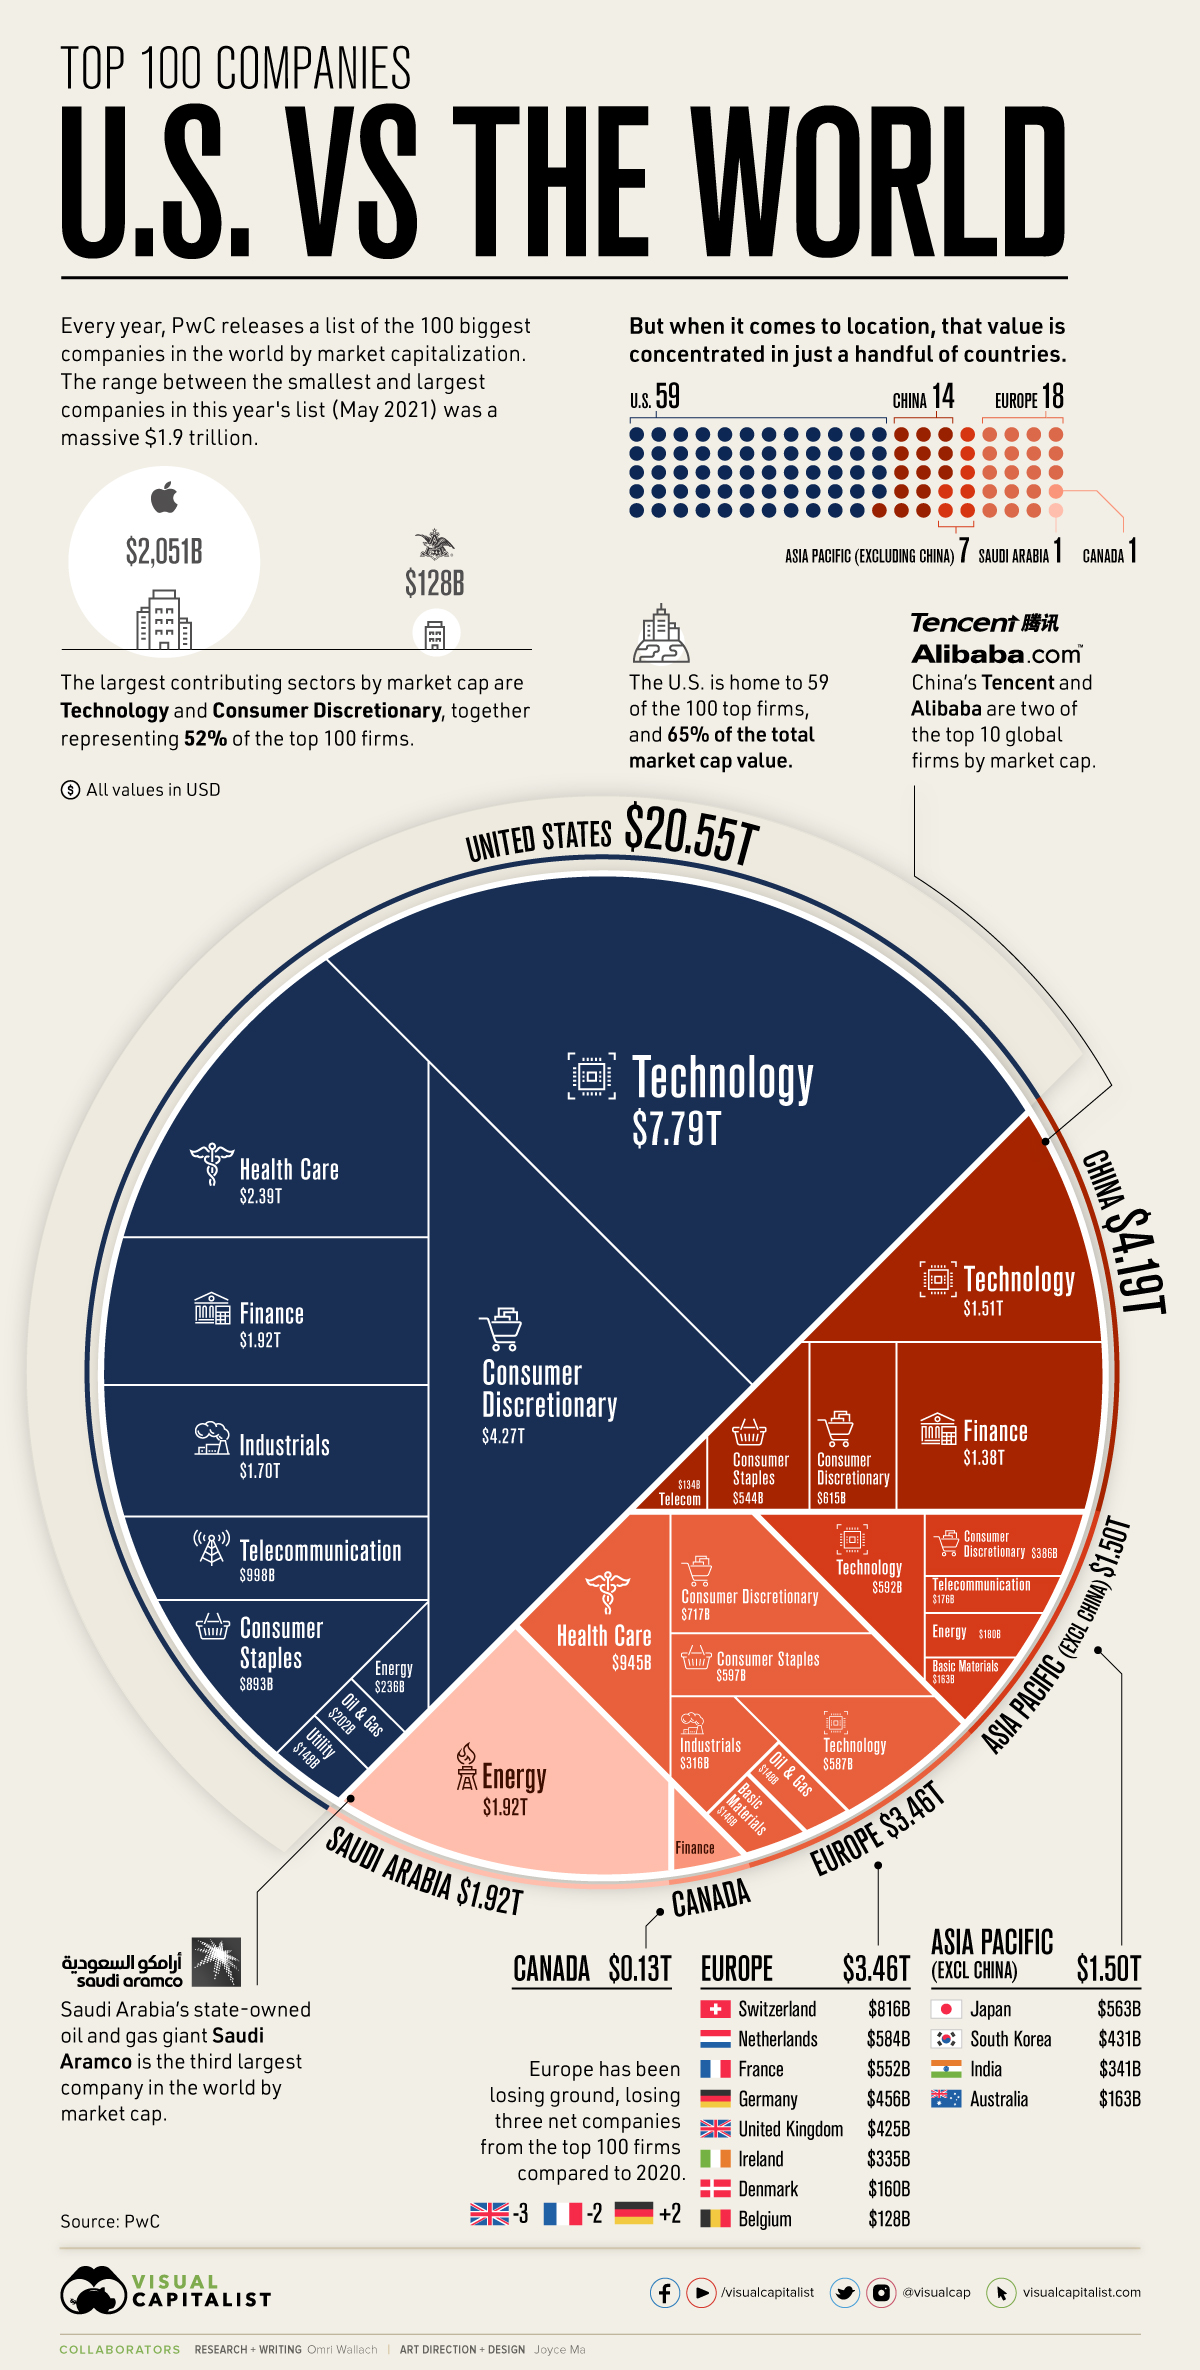 Top 100 Companies of the World vs US